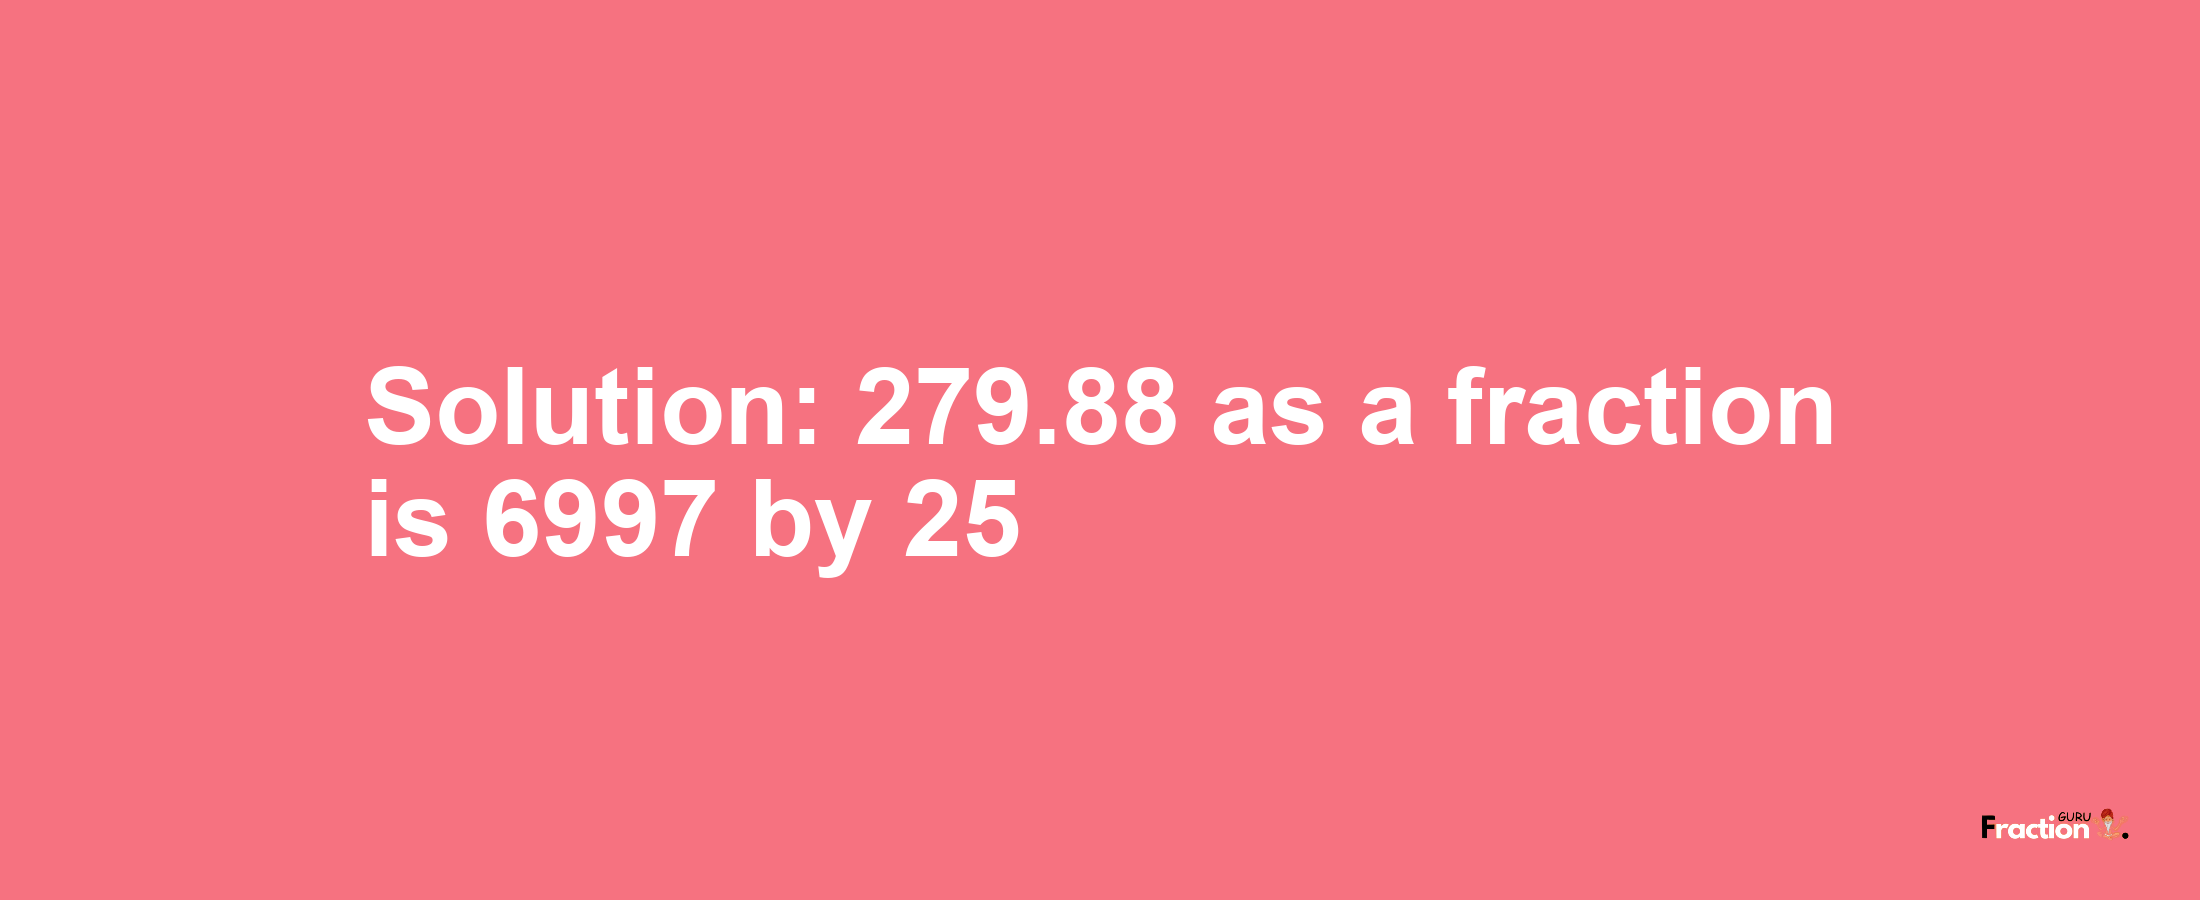 Solution:279.88 as a fraction is 6997/25